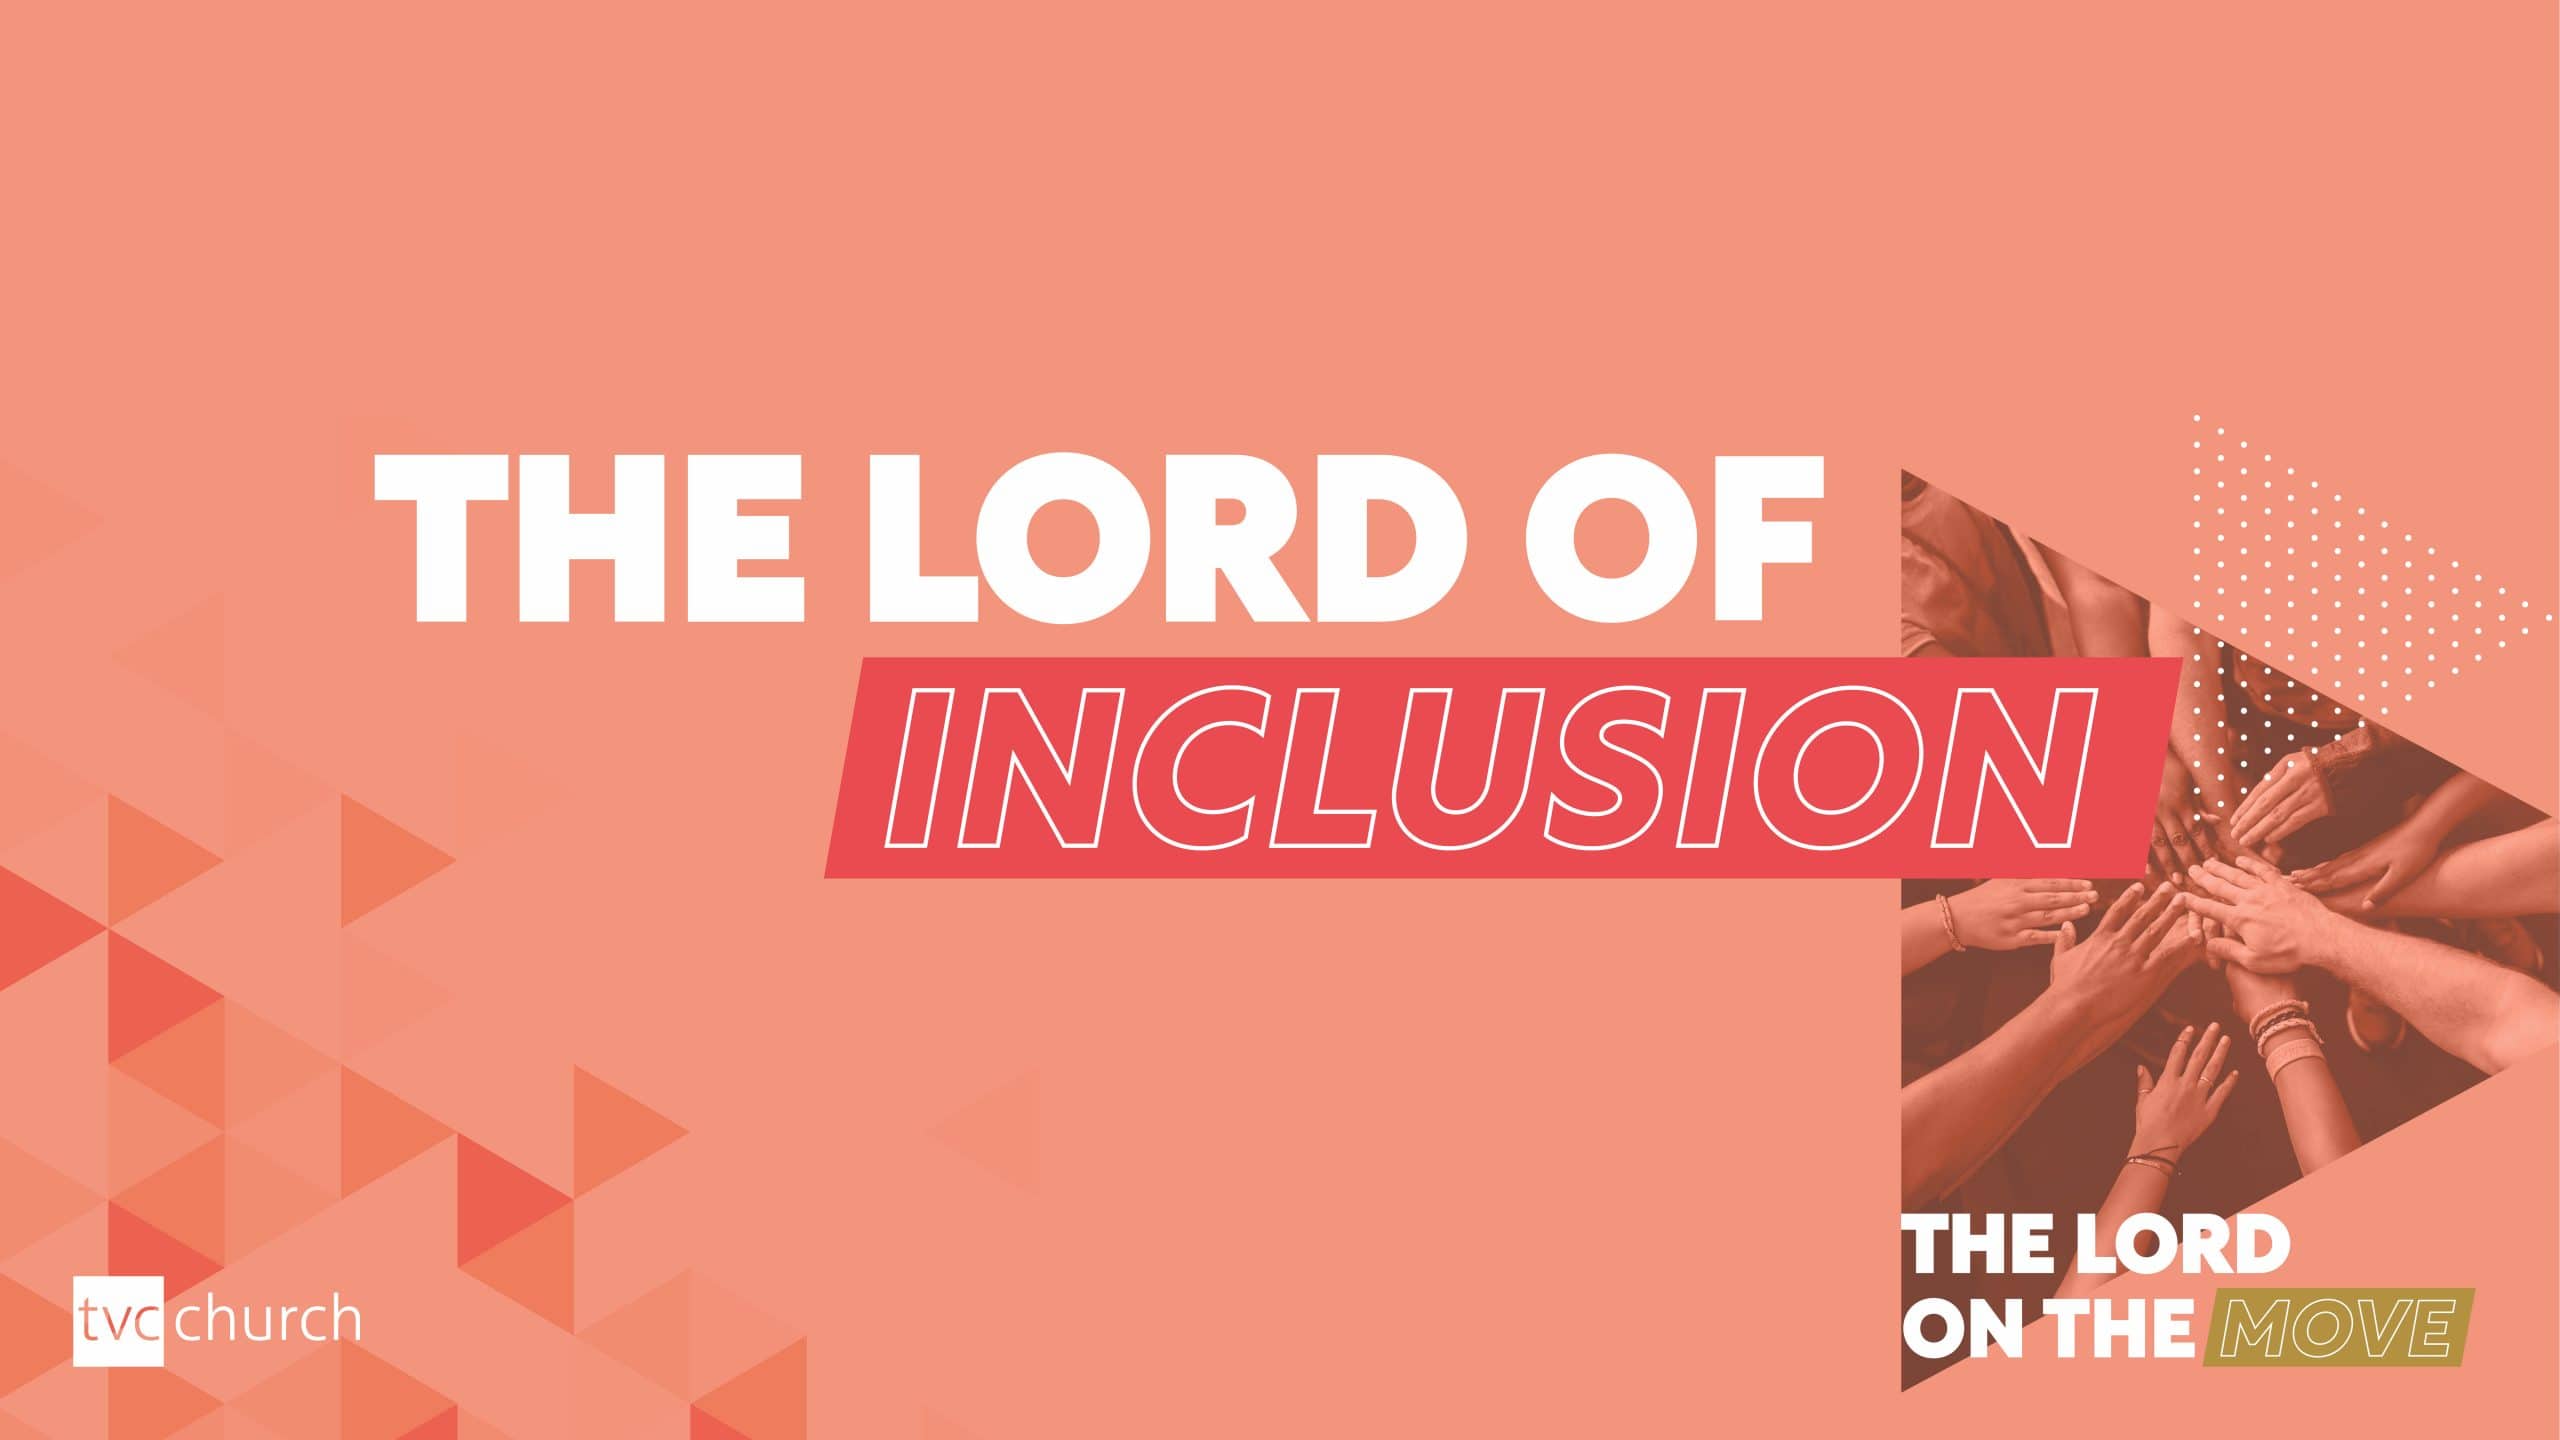 The Lord of Inclusion